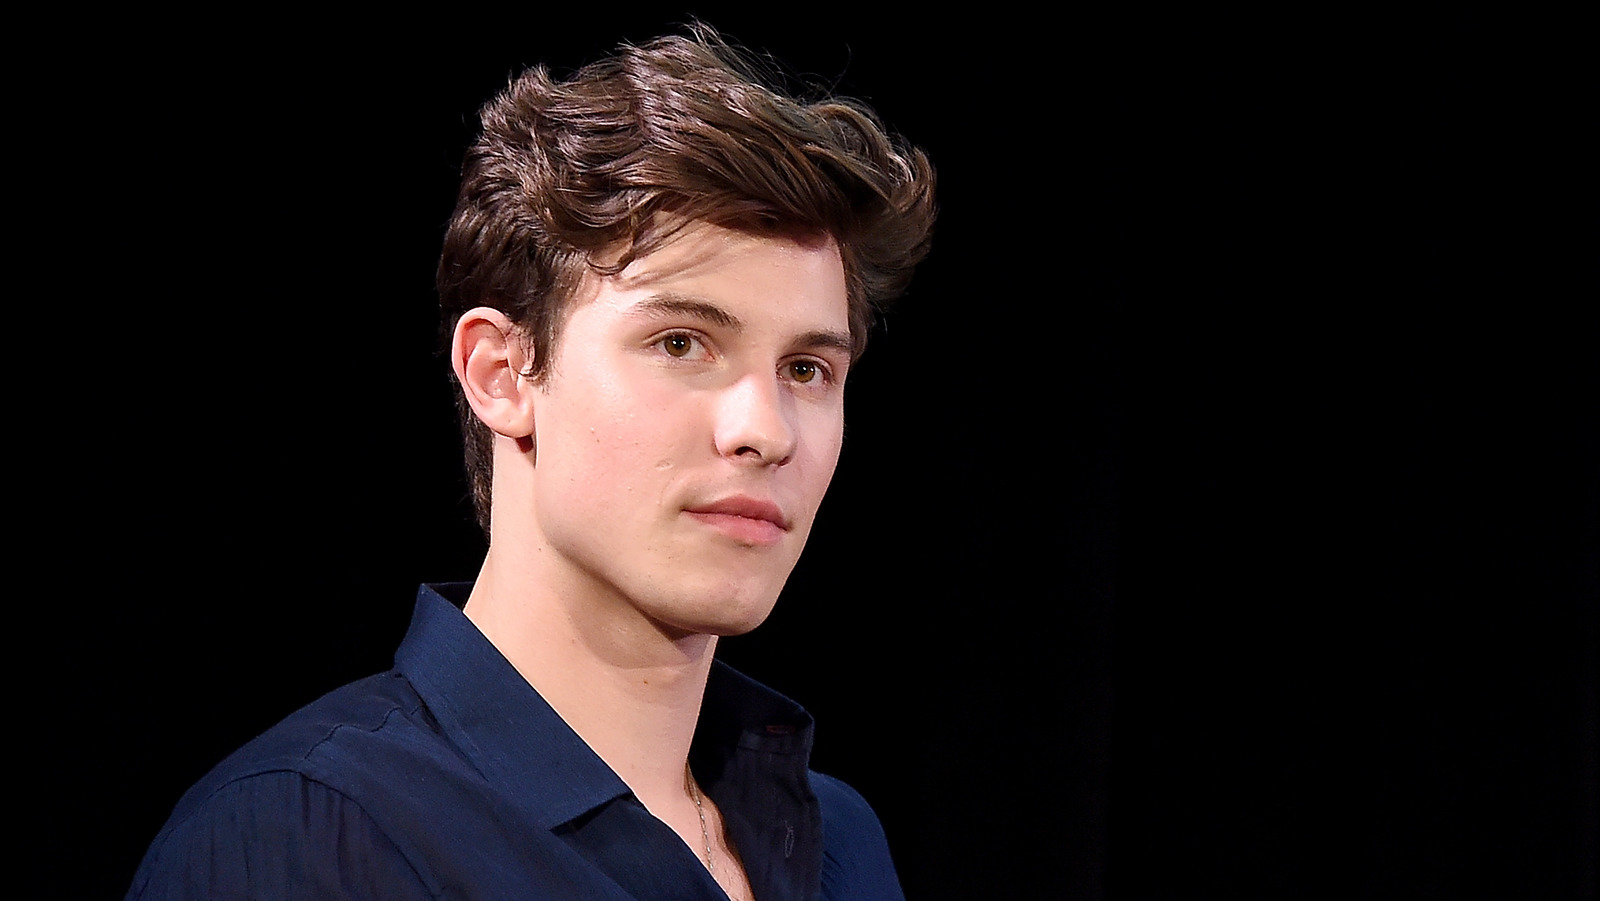 The Powerful Moment That Got Cut From Shawn Mendes' Documentary.